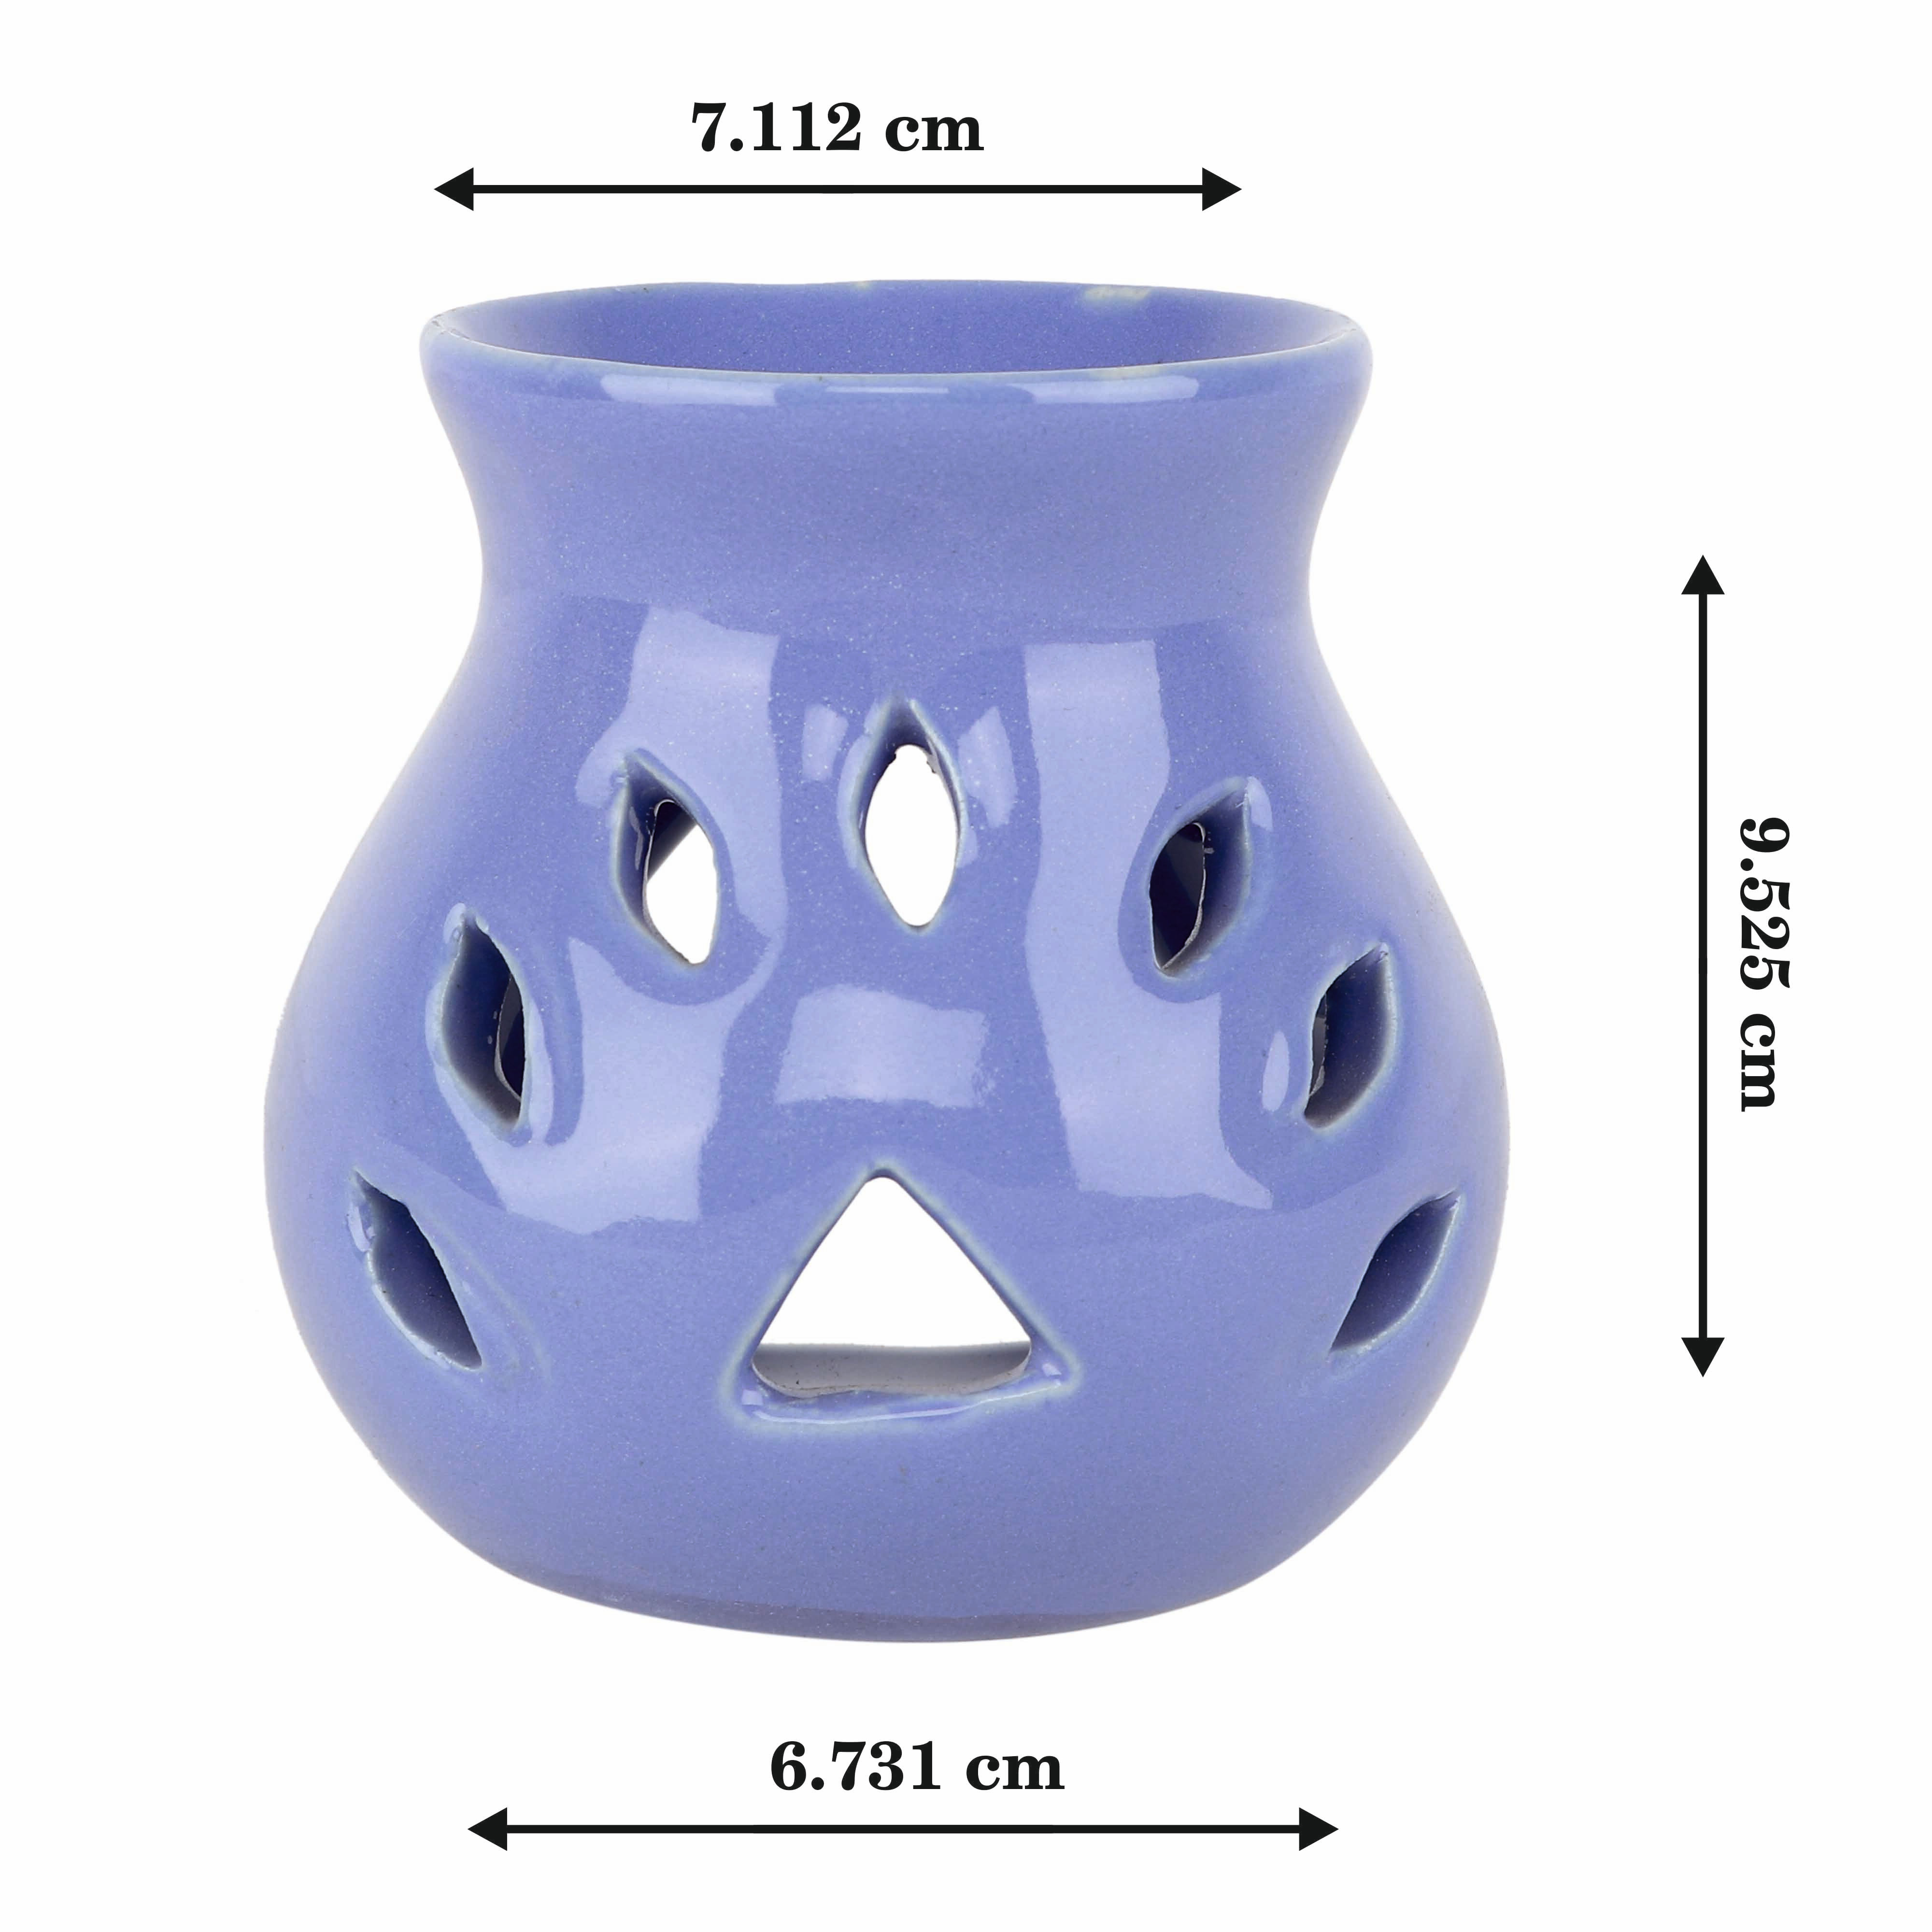 Asian Aura Ceramic Aromatic Oil Diffuser with 2 oil bottles AA-CB-0026PL